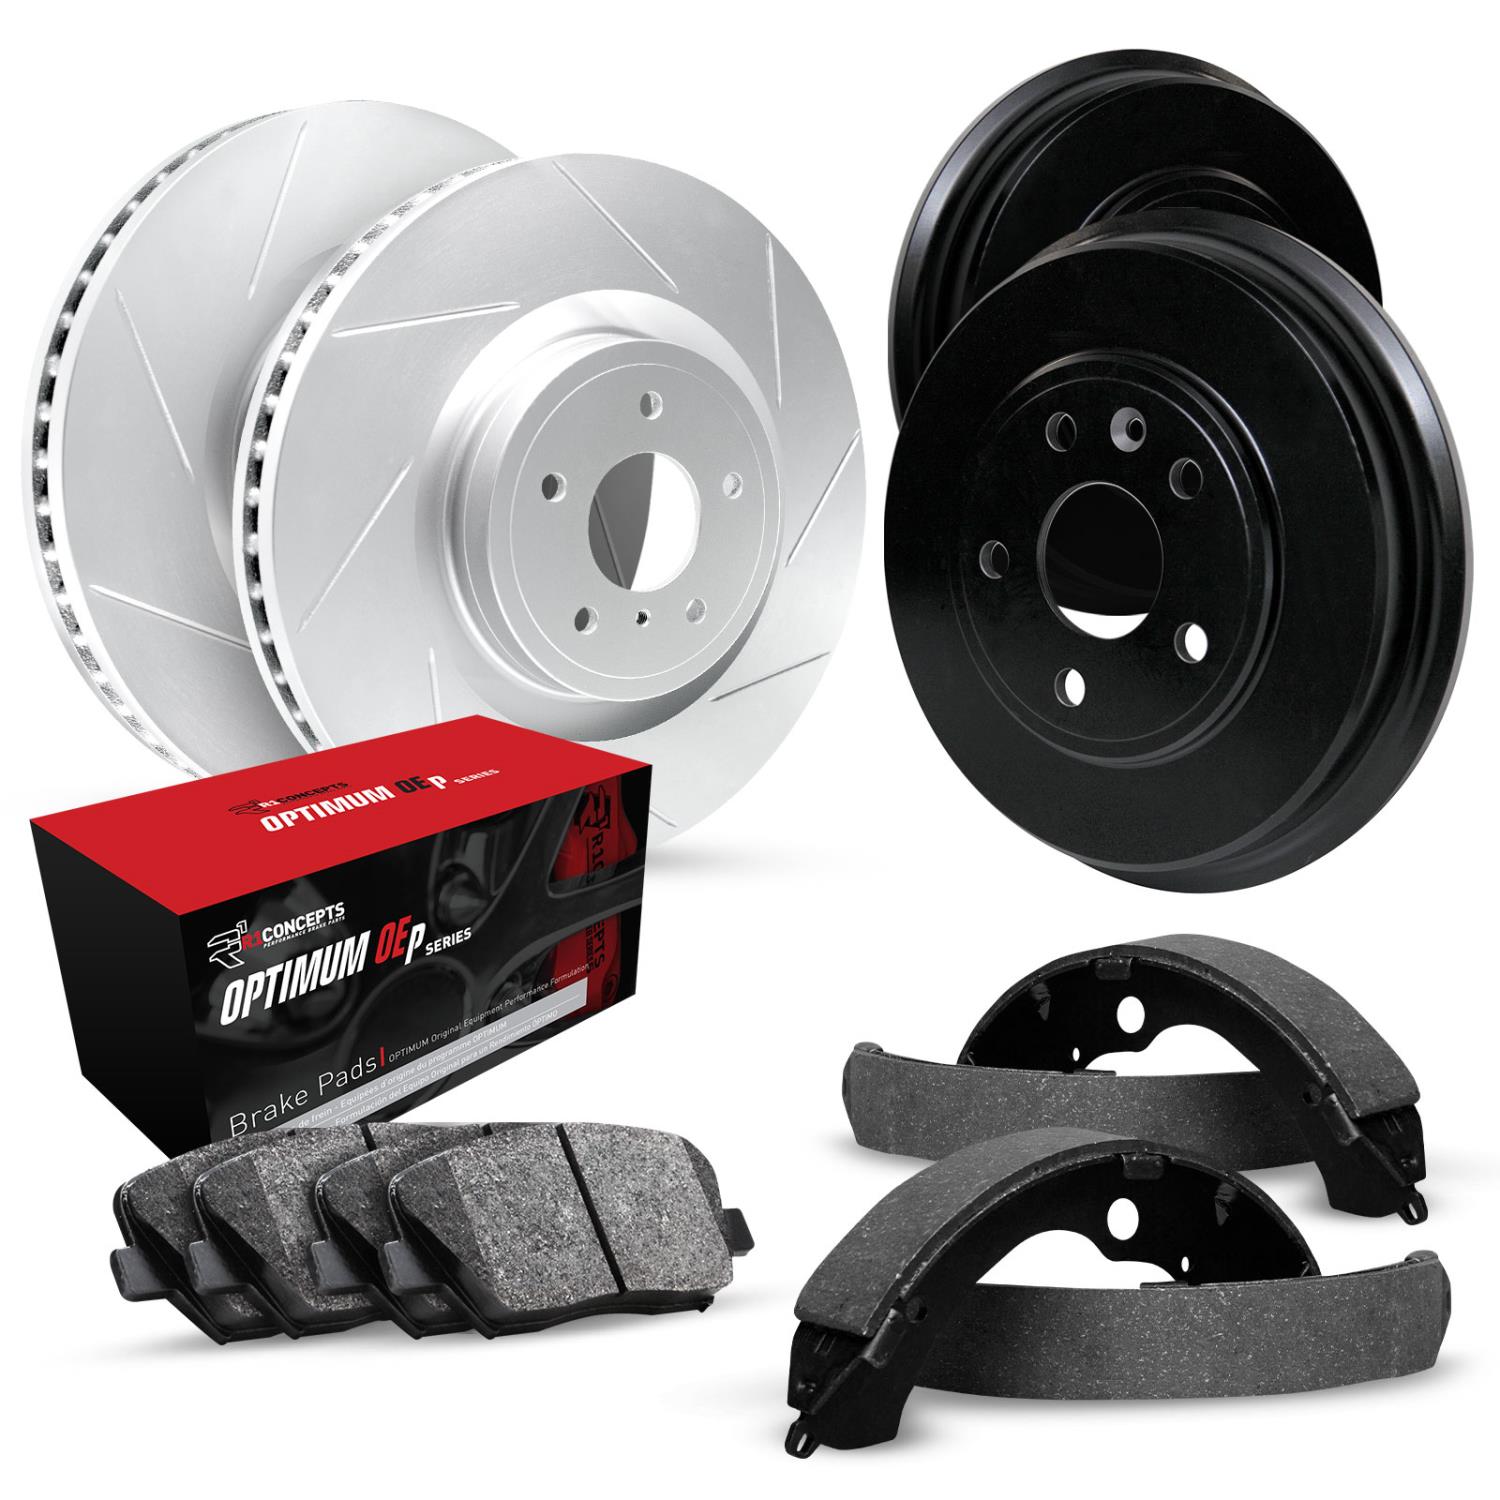 GEO-Carbon Slotted Brake Rotor & Drum Set w/Optimum OE Pads & Shoes, 1988-1999 GM, Position: Front & Rear